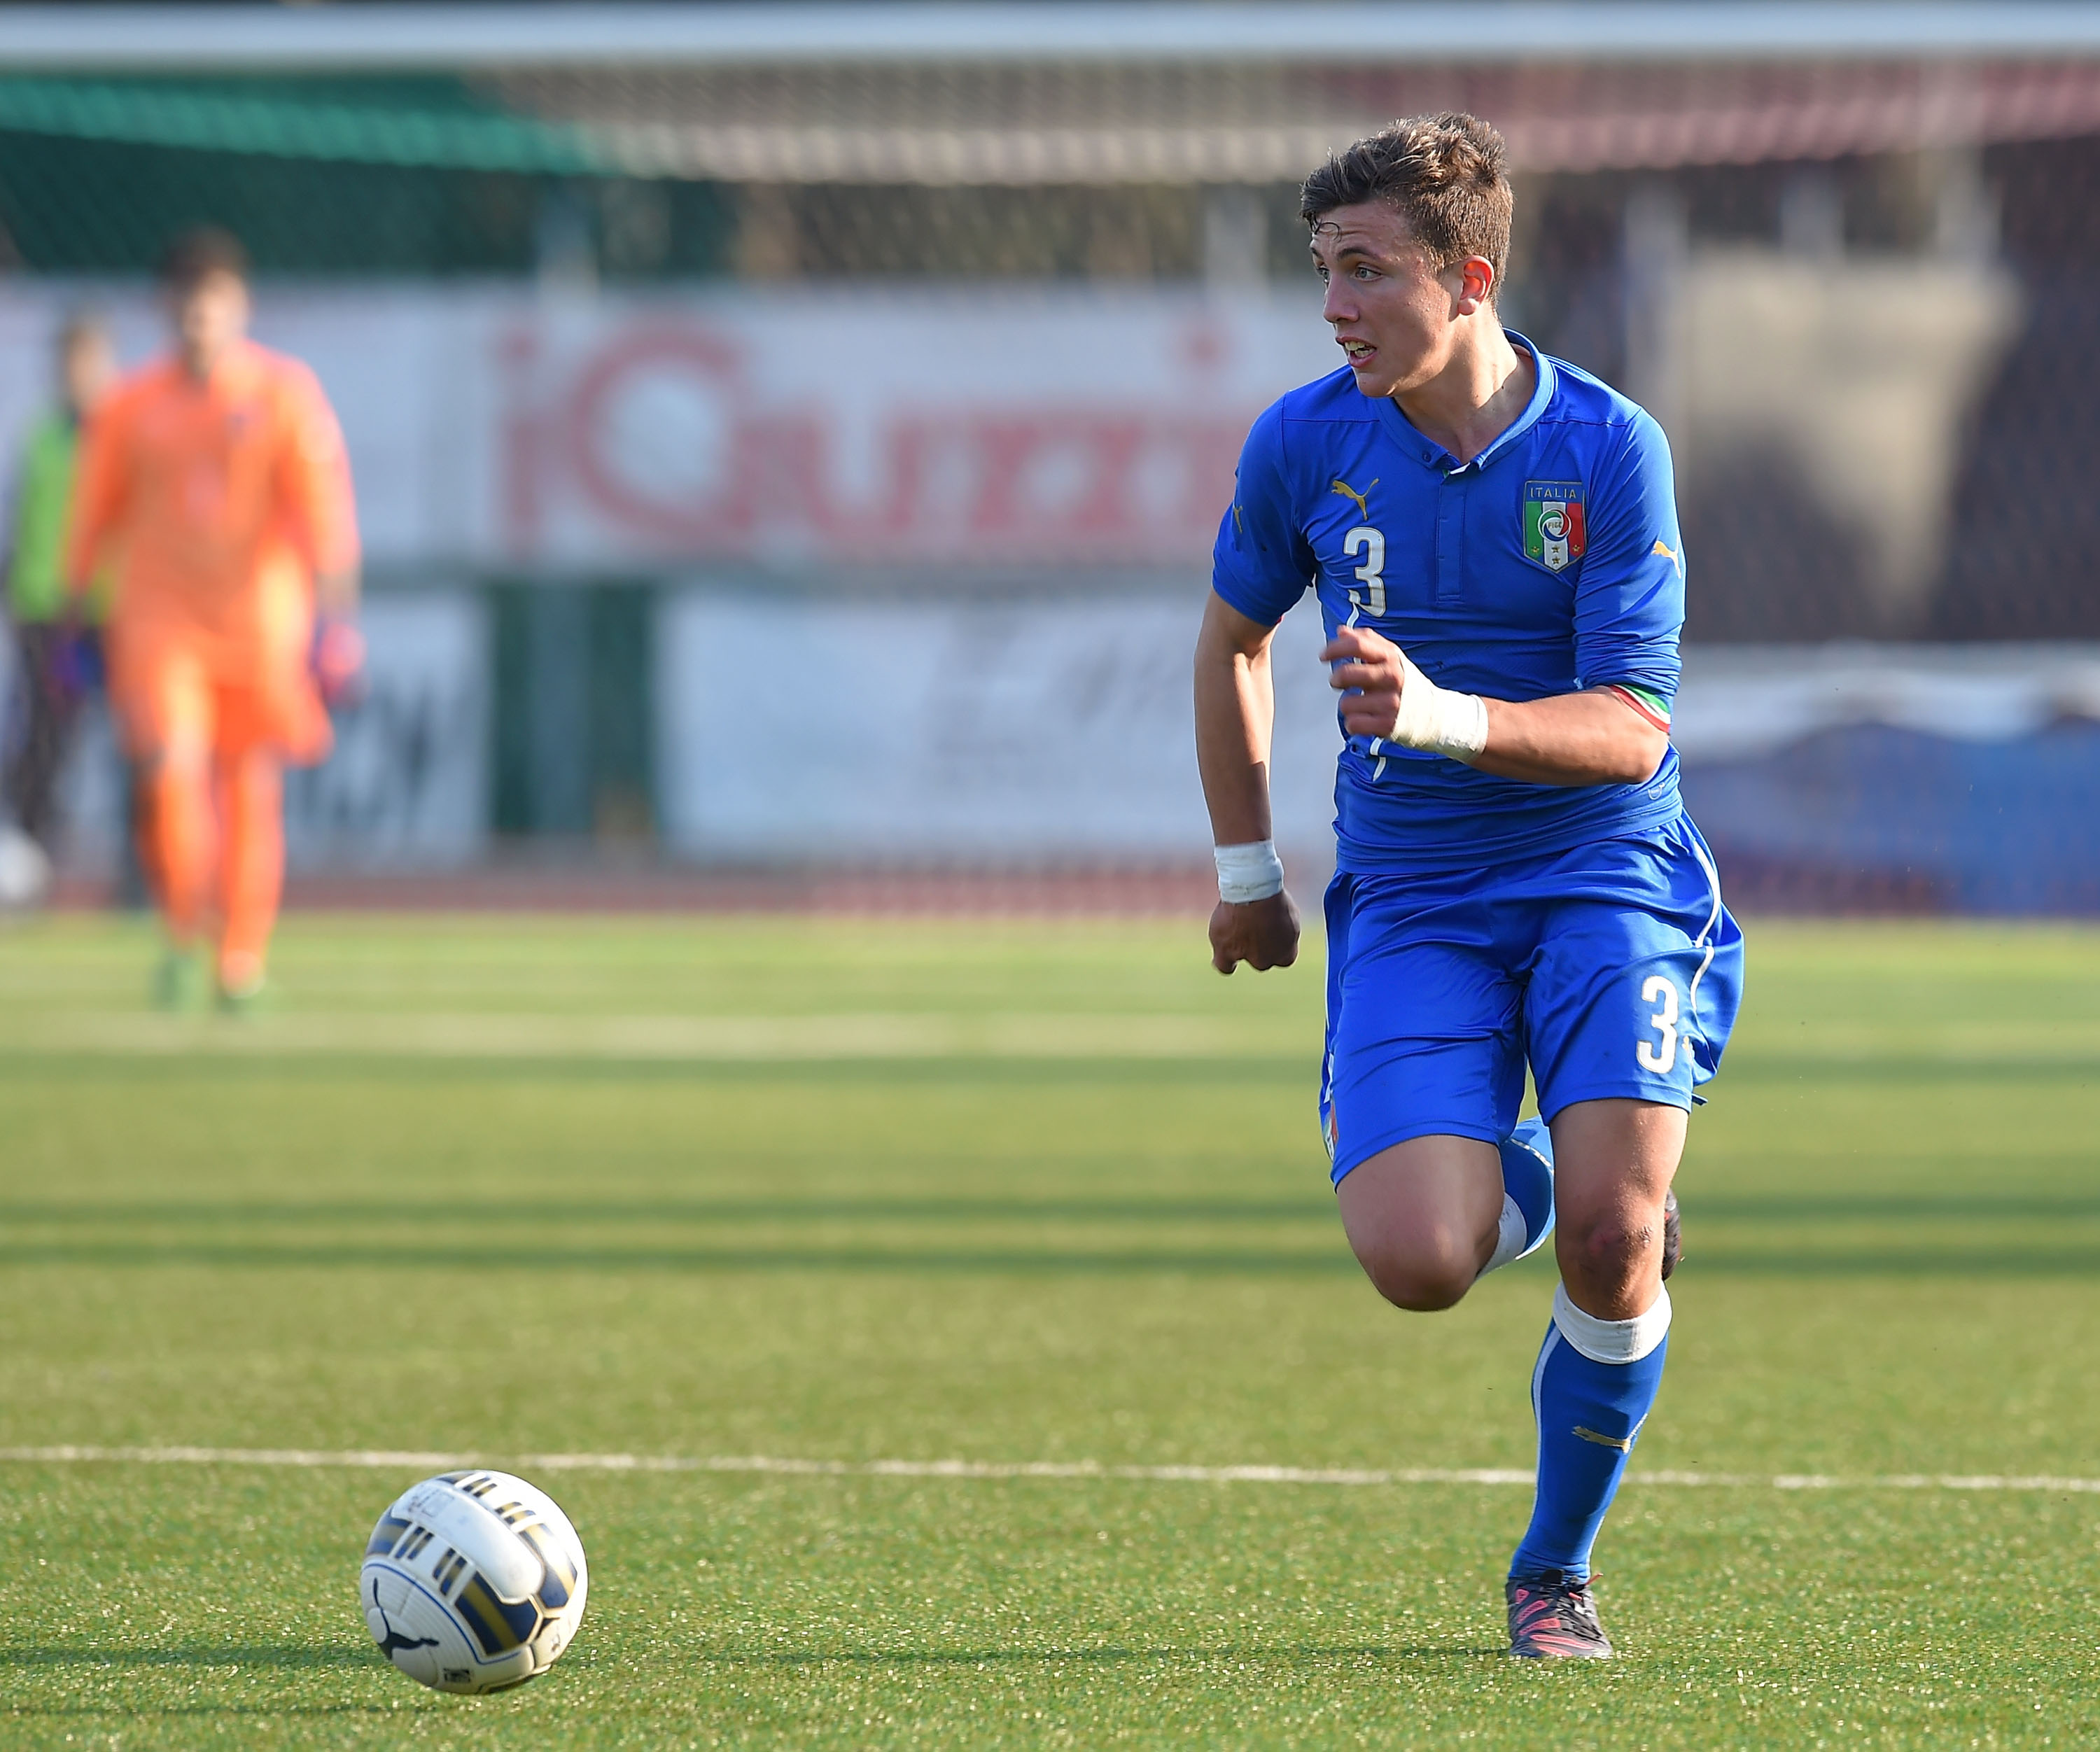 RECANATI, ITALY - MARCH 18:  Luca Pellegrini of Italy in action during the international friendly match between U16 Italy and U16 Germany on March 18, 2015 in Recanati, Italy.  (Photo by Giuseppe Bellini/Getty Images)